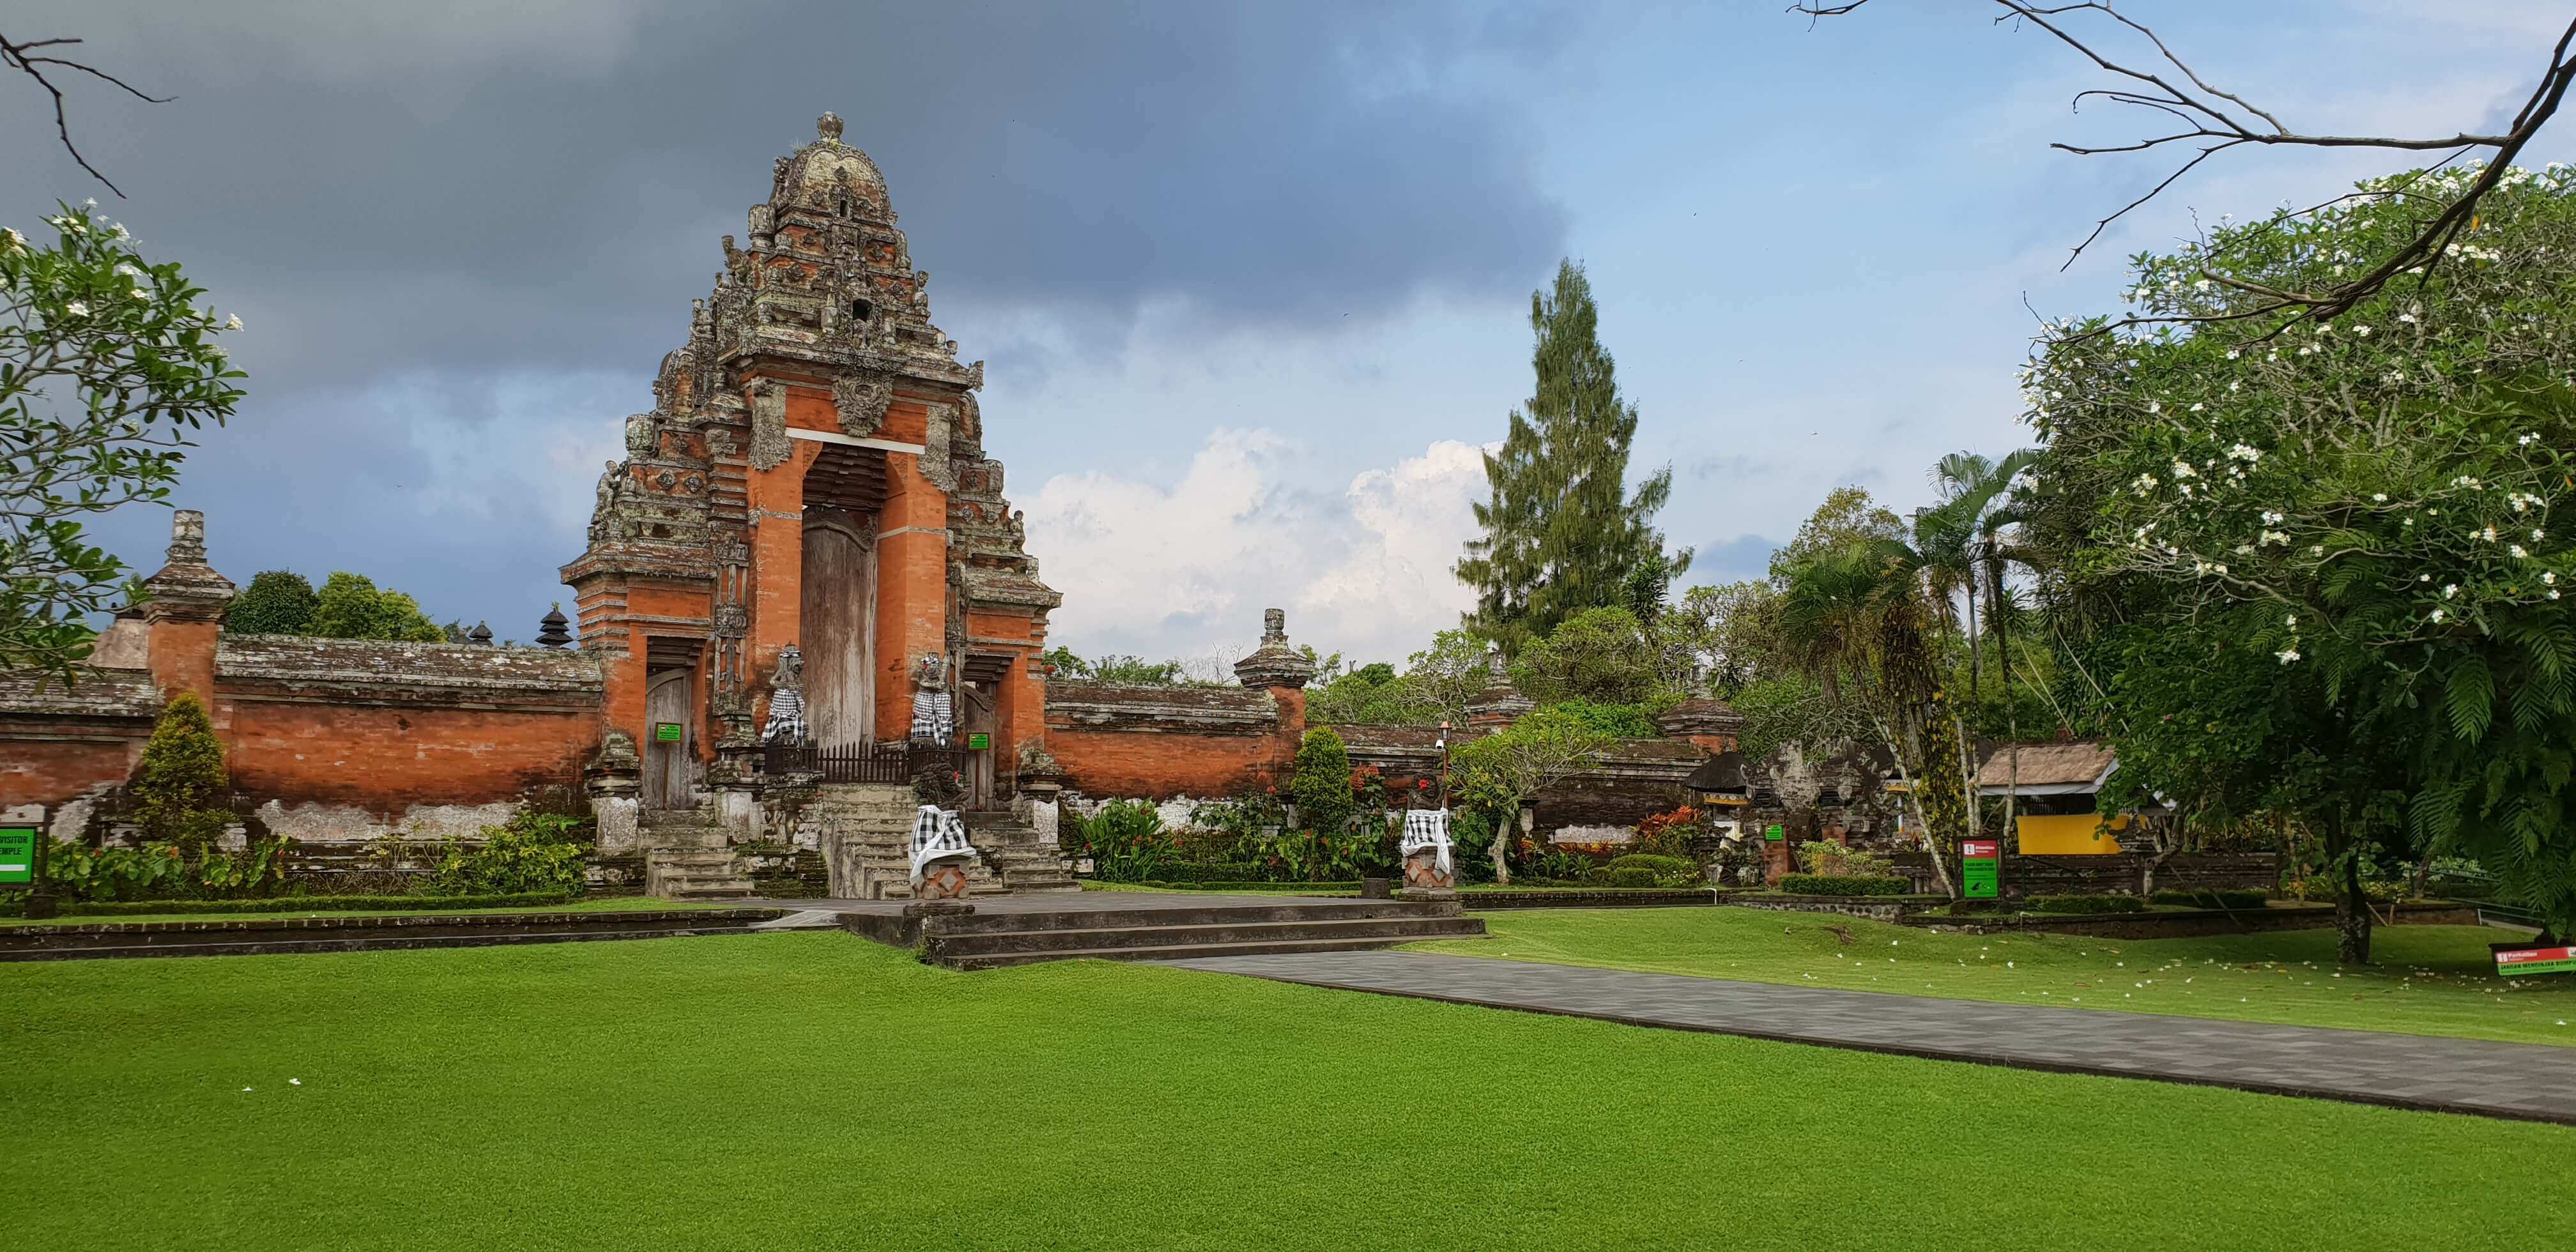 Just like the other temples in the Ubud itinerary, the Taman Ayun temple also has characteristic Balinese architectural features throughout it's premises